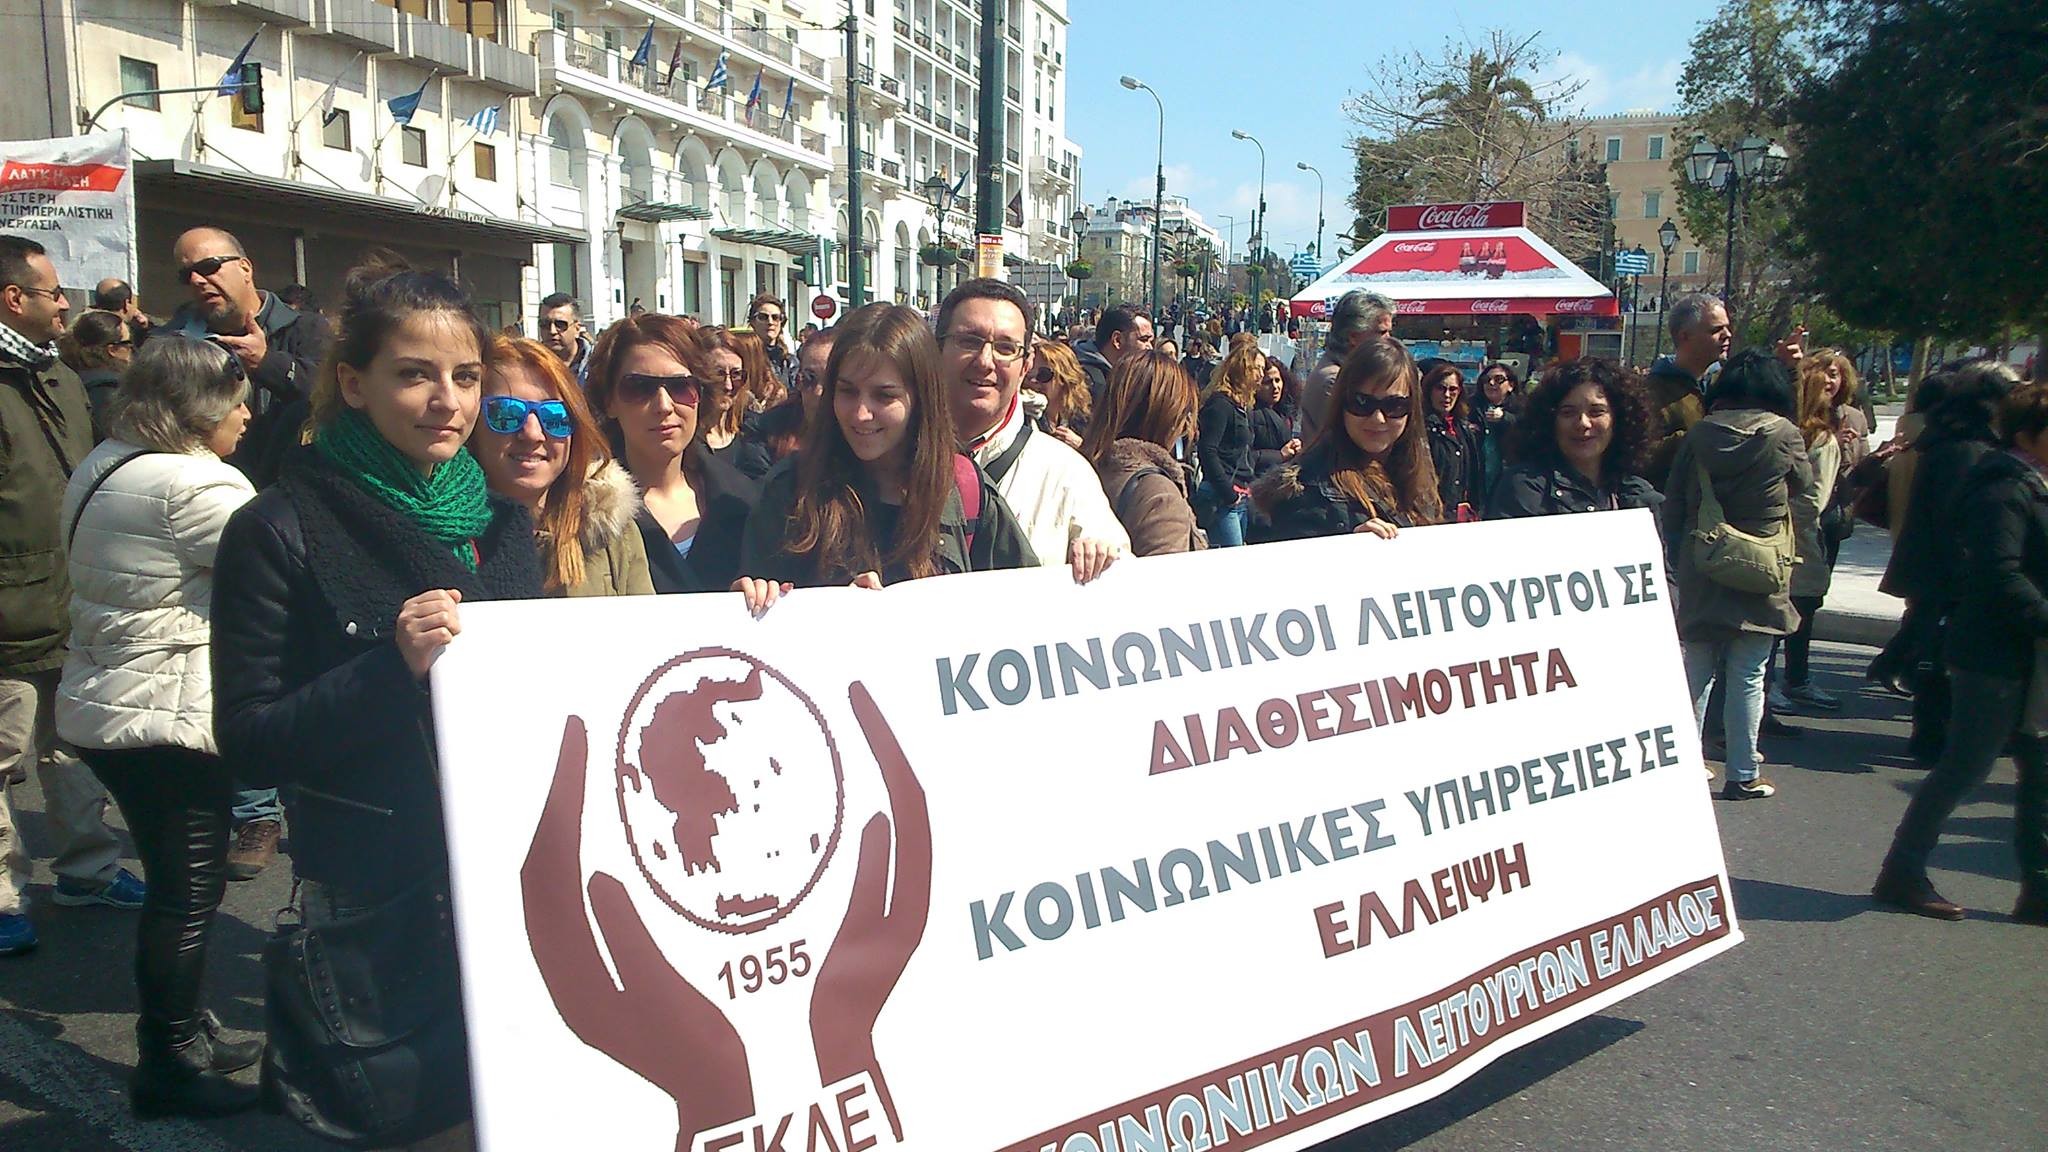 2048x1152 Greece: Social Work Day of Action